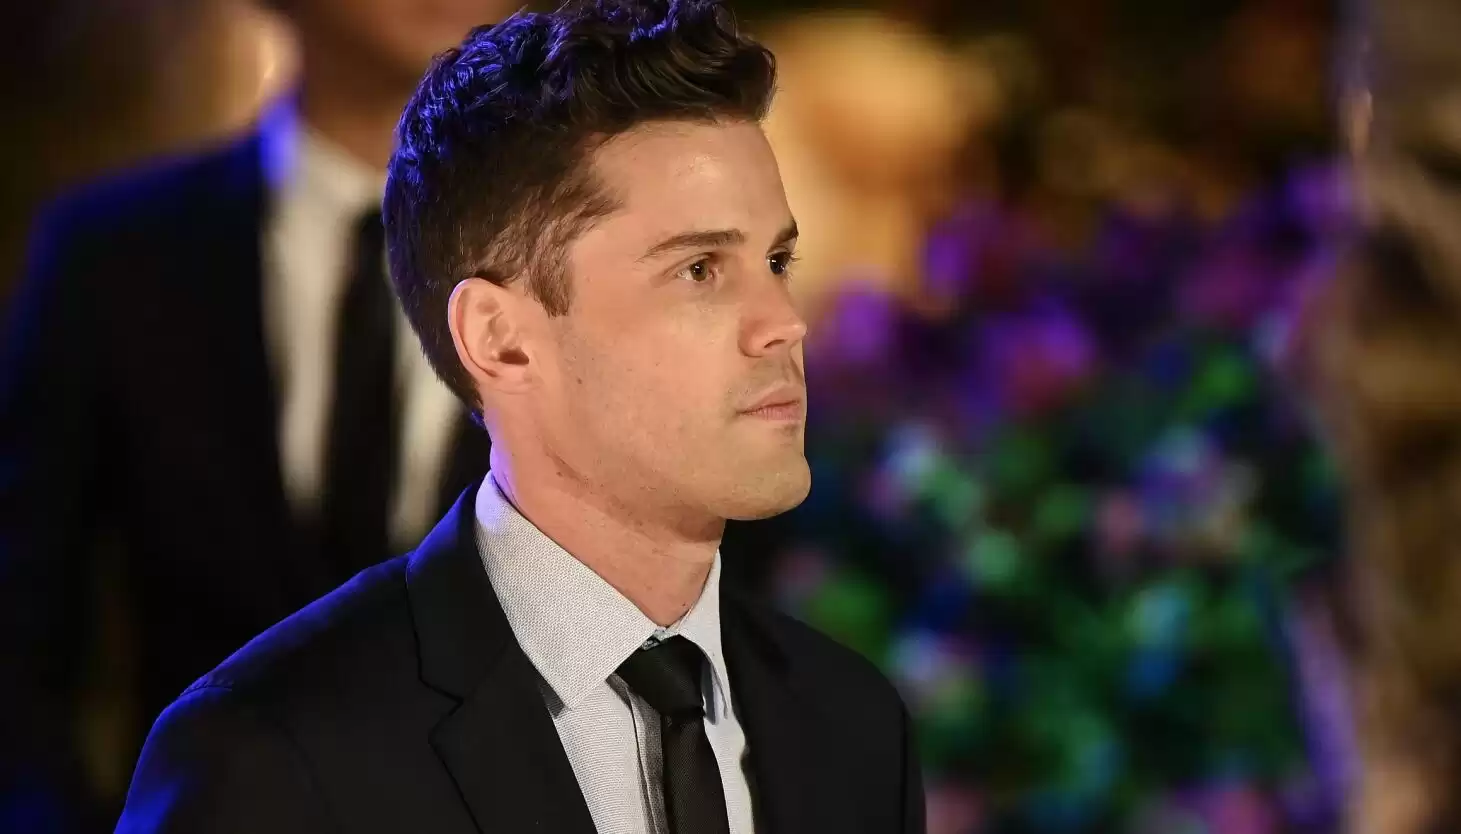 Donny Osmond's son joins 'Claim to Fame' as contestants struggle to recognize him